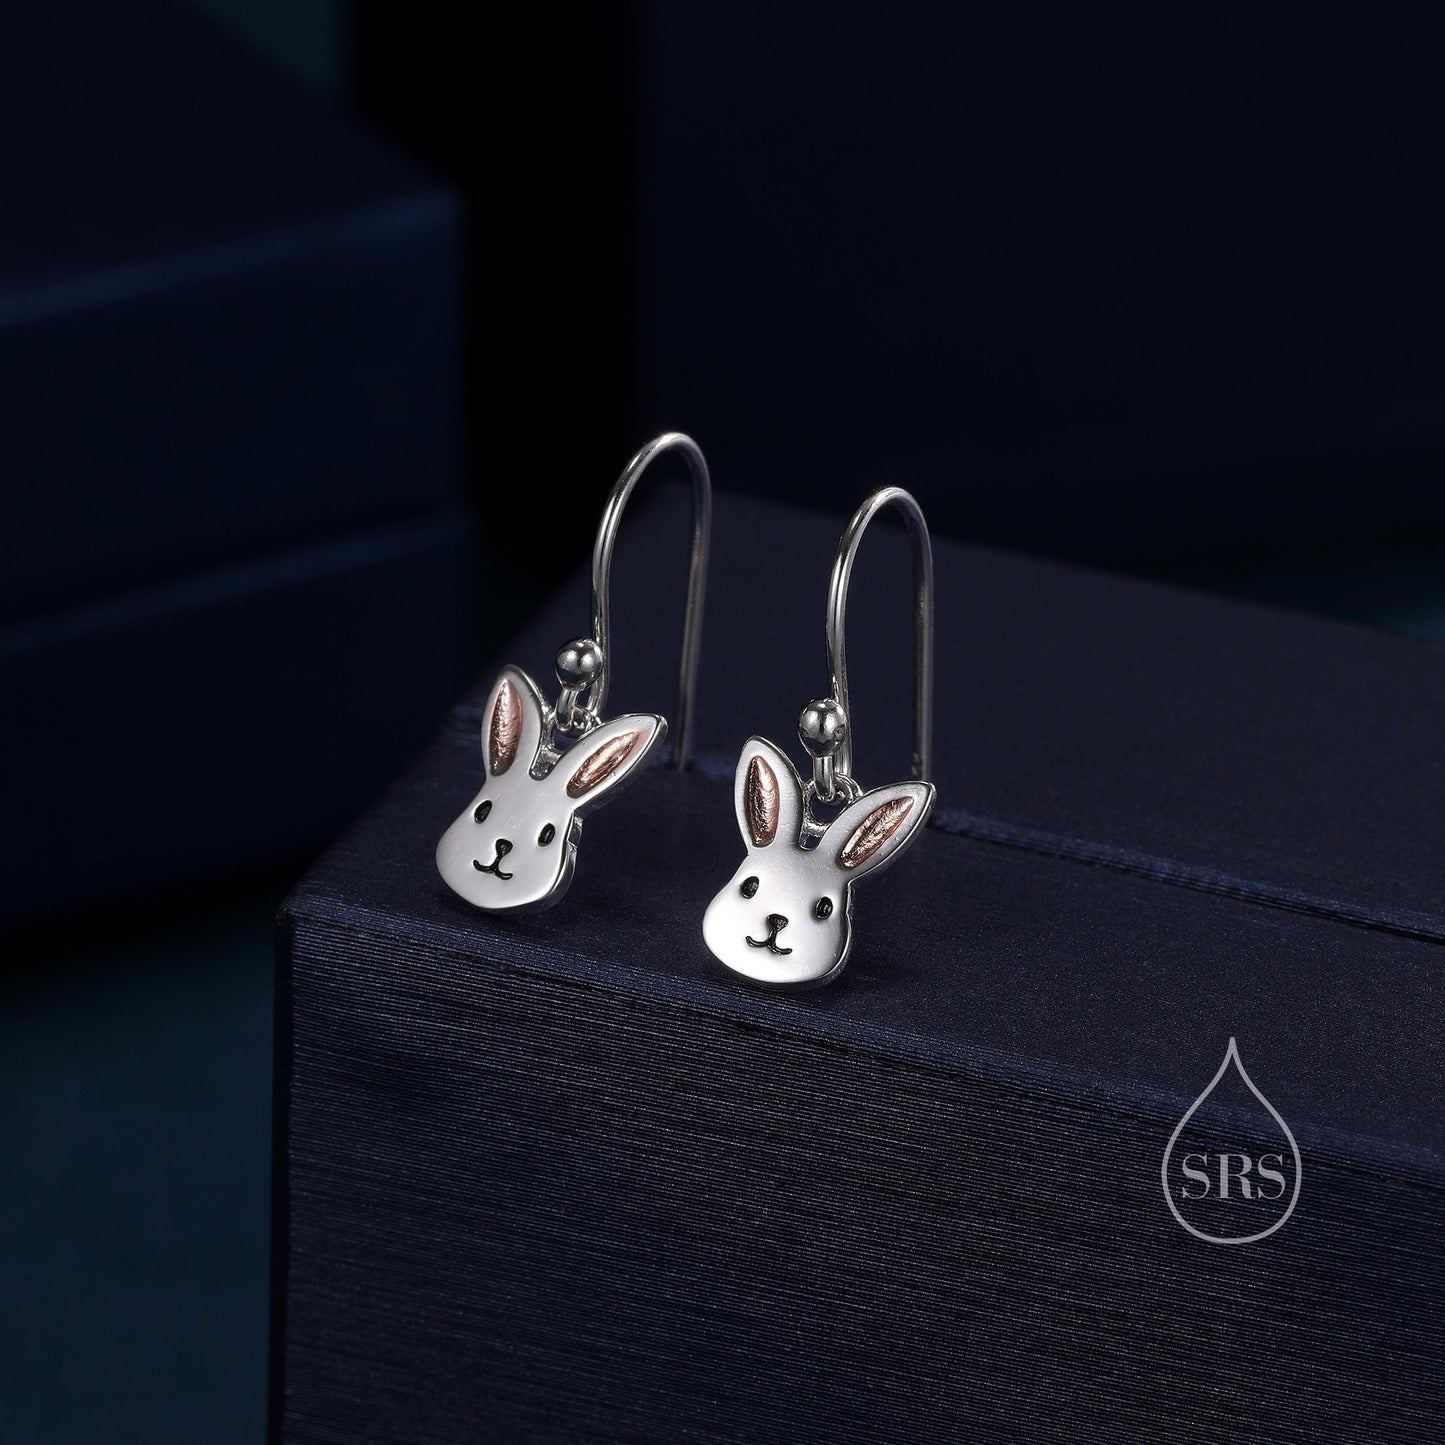 Bunny Head Drop Hook Earrings in Sterling Silver with Partial Rose Gold Coating, Sterling Silver Rabbit  Earrings, Nature Inspired